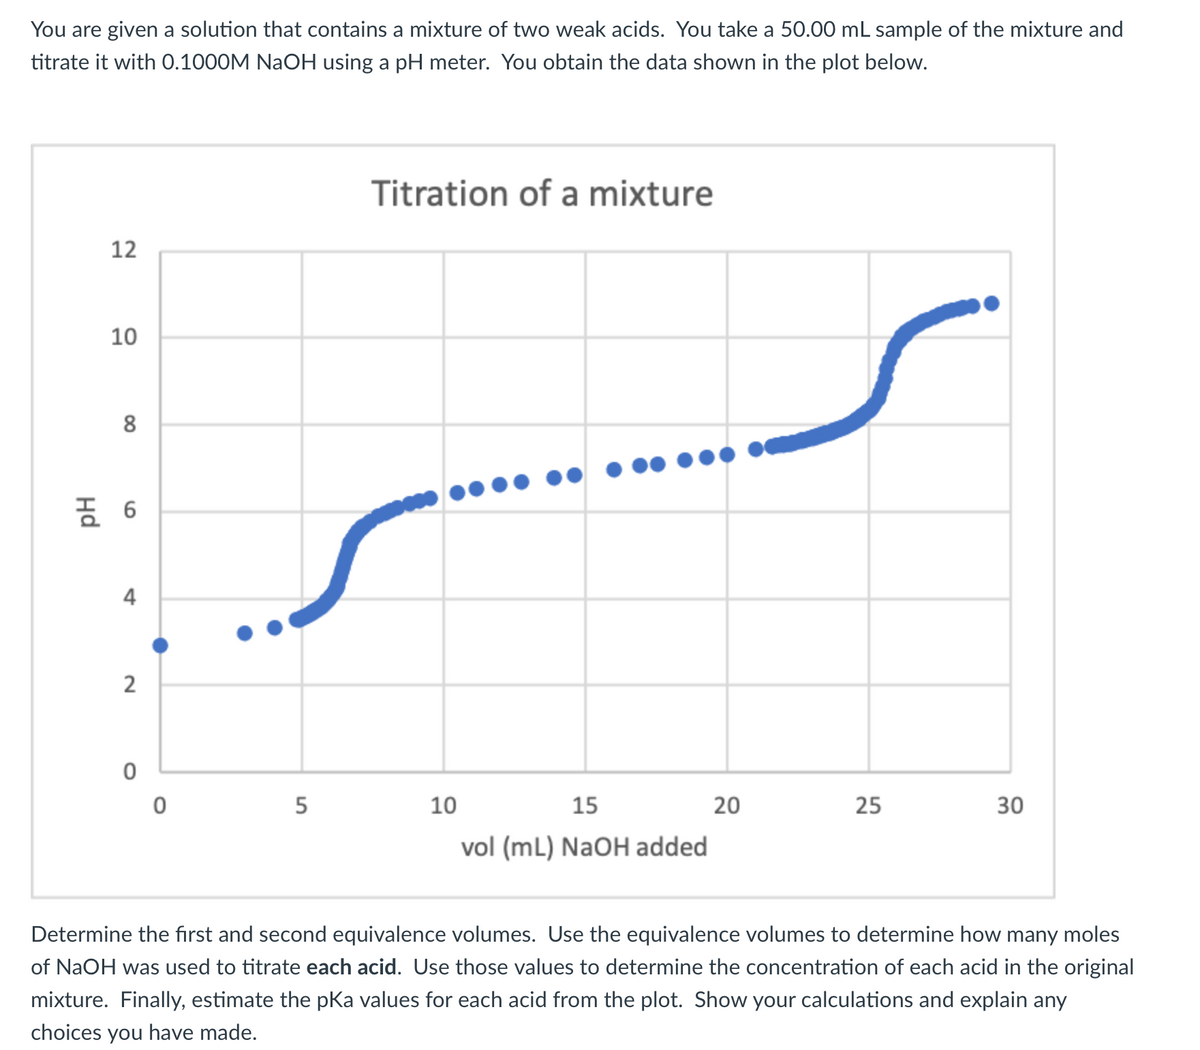 You are given a solution that contains a mixture of two weak acids. You take a 50.00 mL sample of the mixture and
titrate it with 0.1000M NaOH using a pH meter. You obtain the data shown in the plot below.
12
10
8
6
4
2
0
0
5
Titration of a mixture
10
15
vol (mL) NaOH added
20
25
30
Determine the first and second equivalence volumes. Use the equivalence volumes to determine how many moles
of NaOH was used to titrate each acid. Use those values to determine the concentration of each acid in the original
mixture. Finally, estimate the pKa values for each acid from the plot. Show your calculations and explain any
choices you have made.